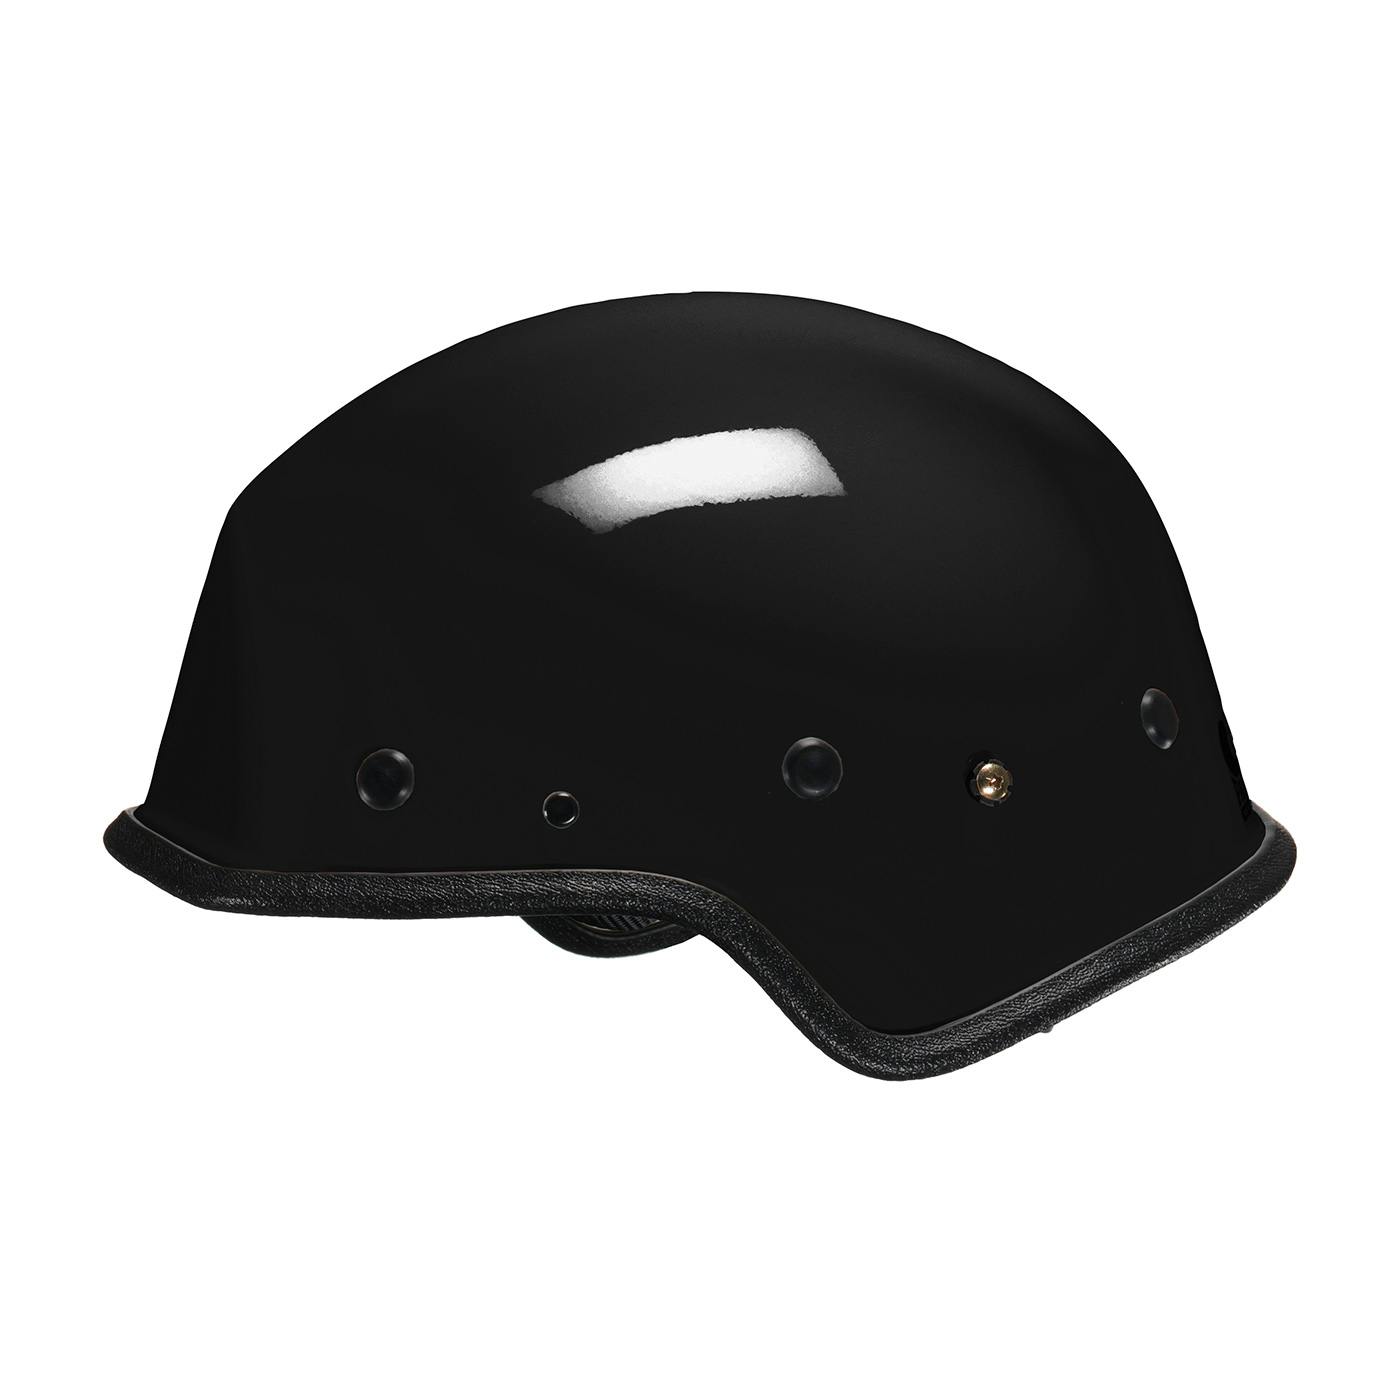 R7H™ Rescue Helmet with ESS Goggle Mounts (815-32XX)